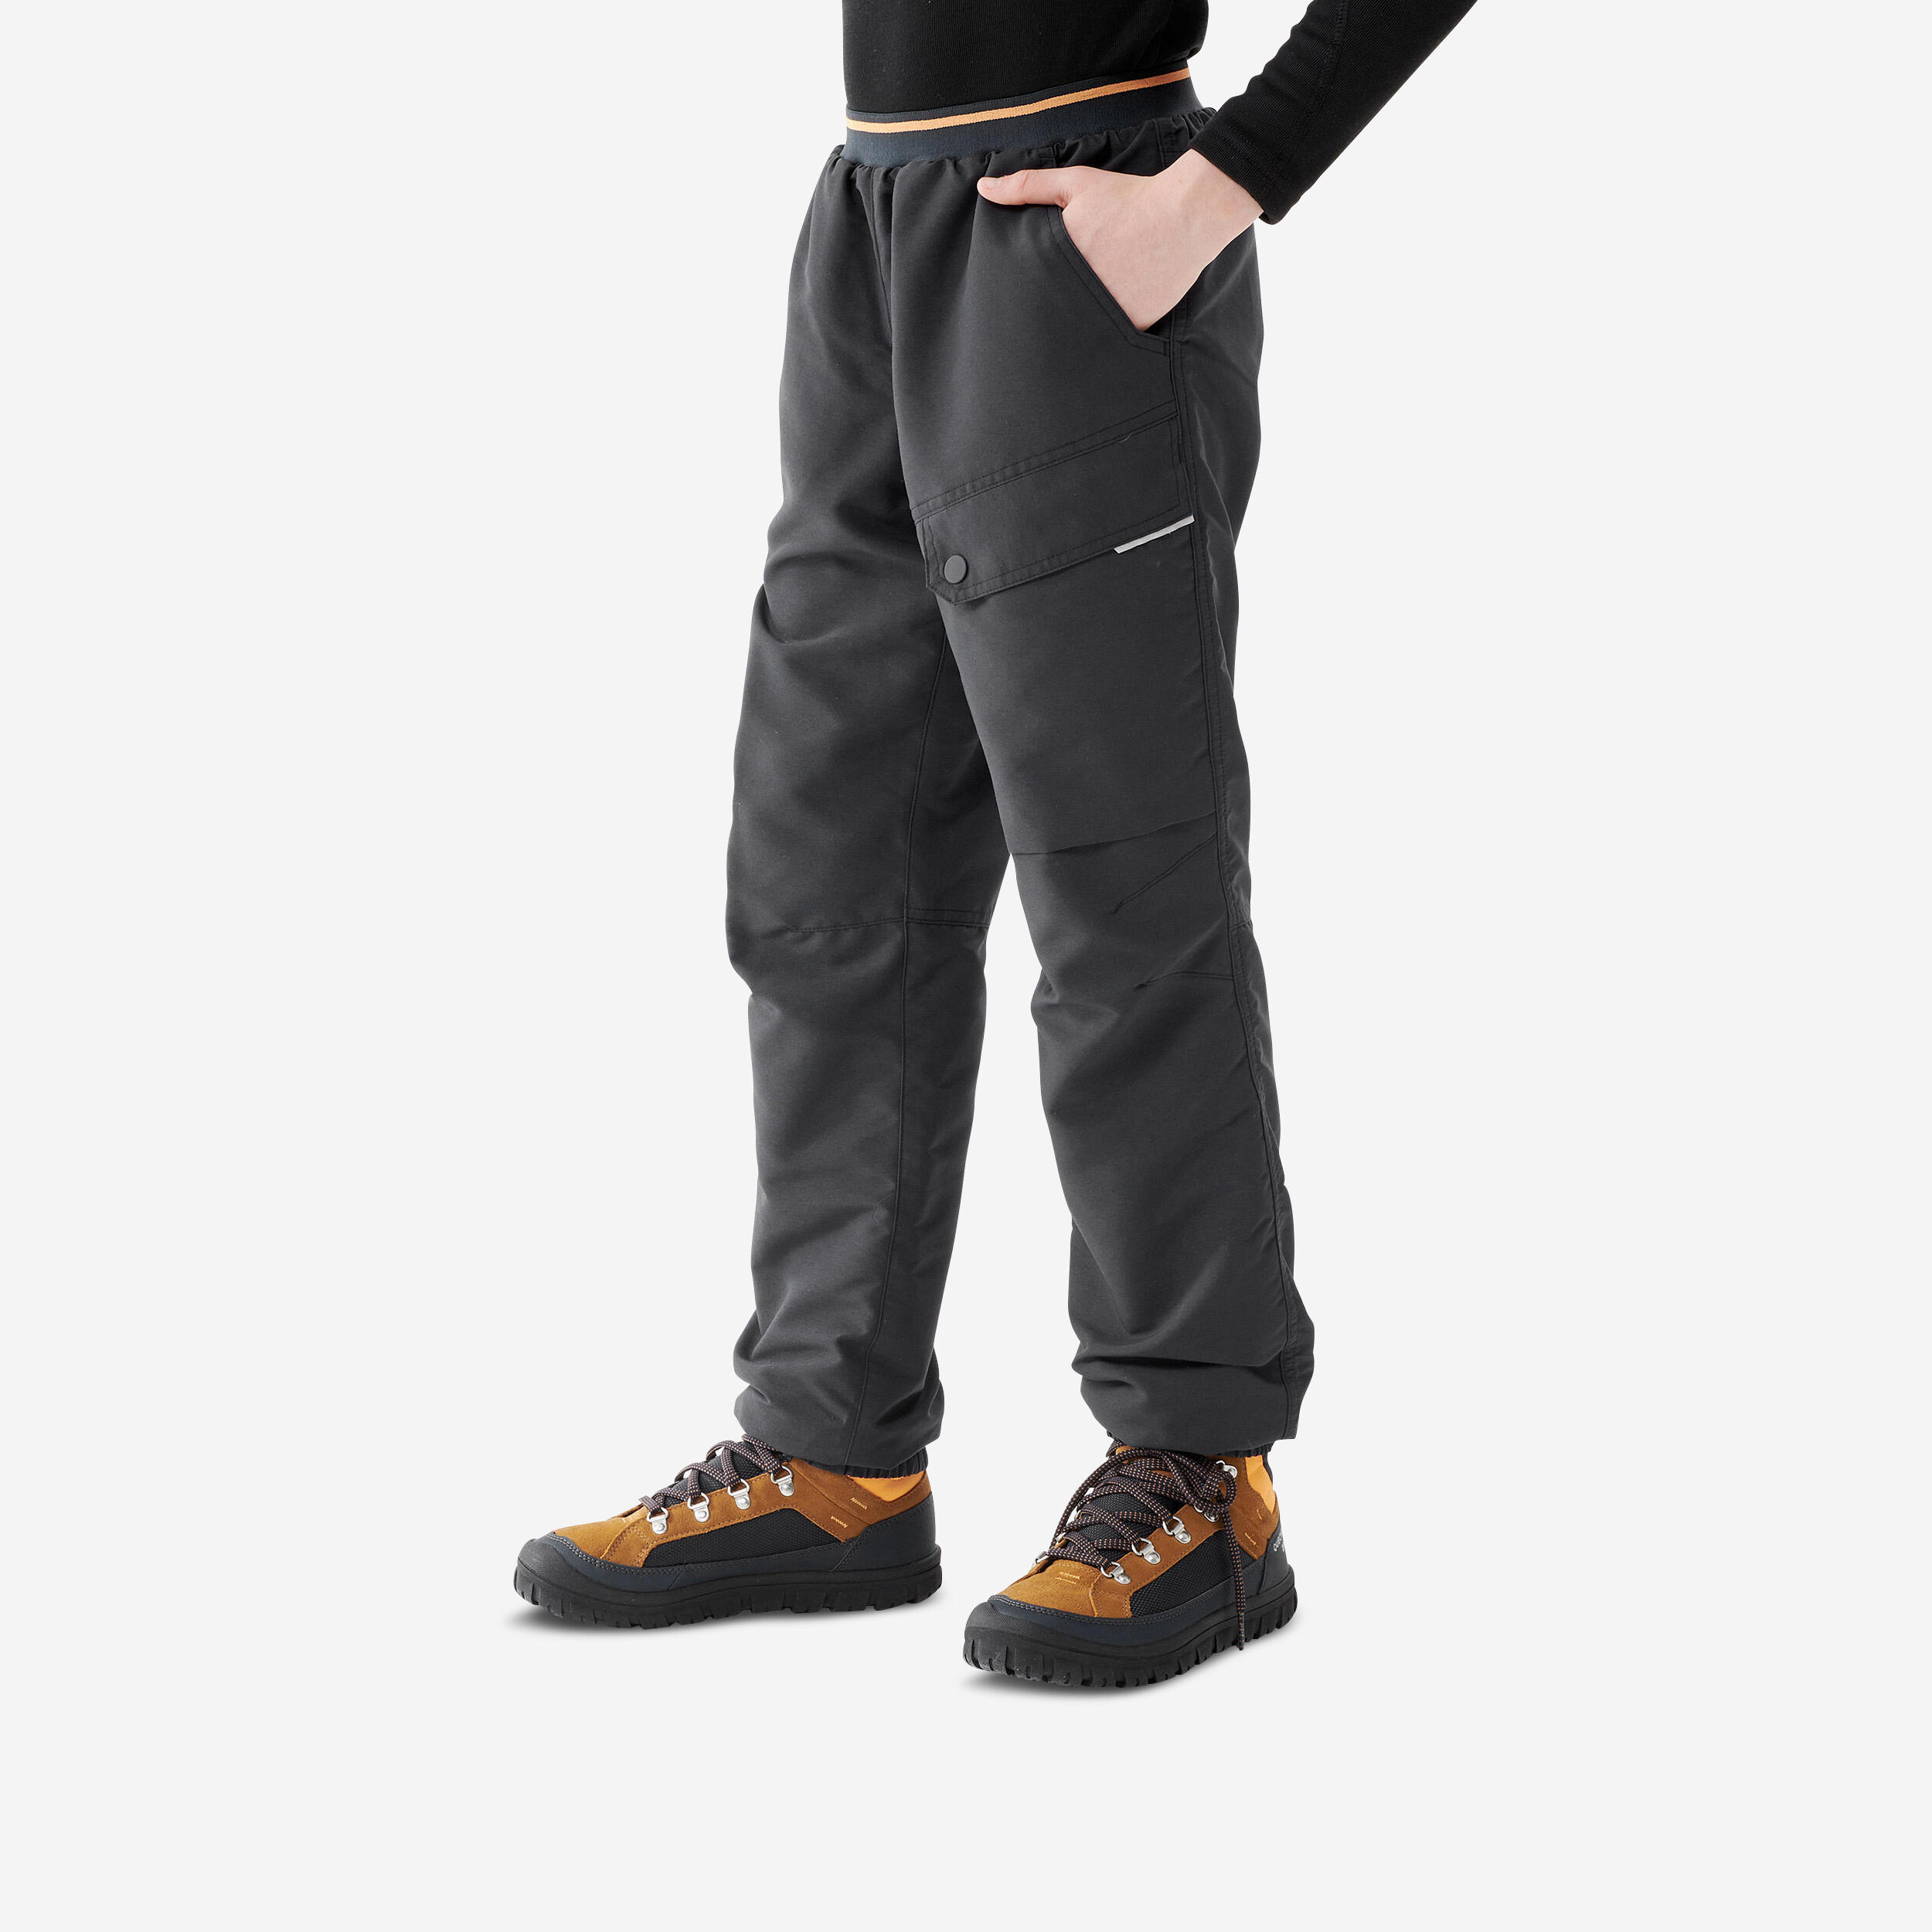 Decathlon Sports India - Our backpacker designers have designed these  trousers so that you can travel the world with confidence, whatever the  environment.. Equipped with numerous pockets including 3 closing pockets  these